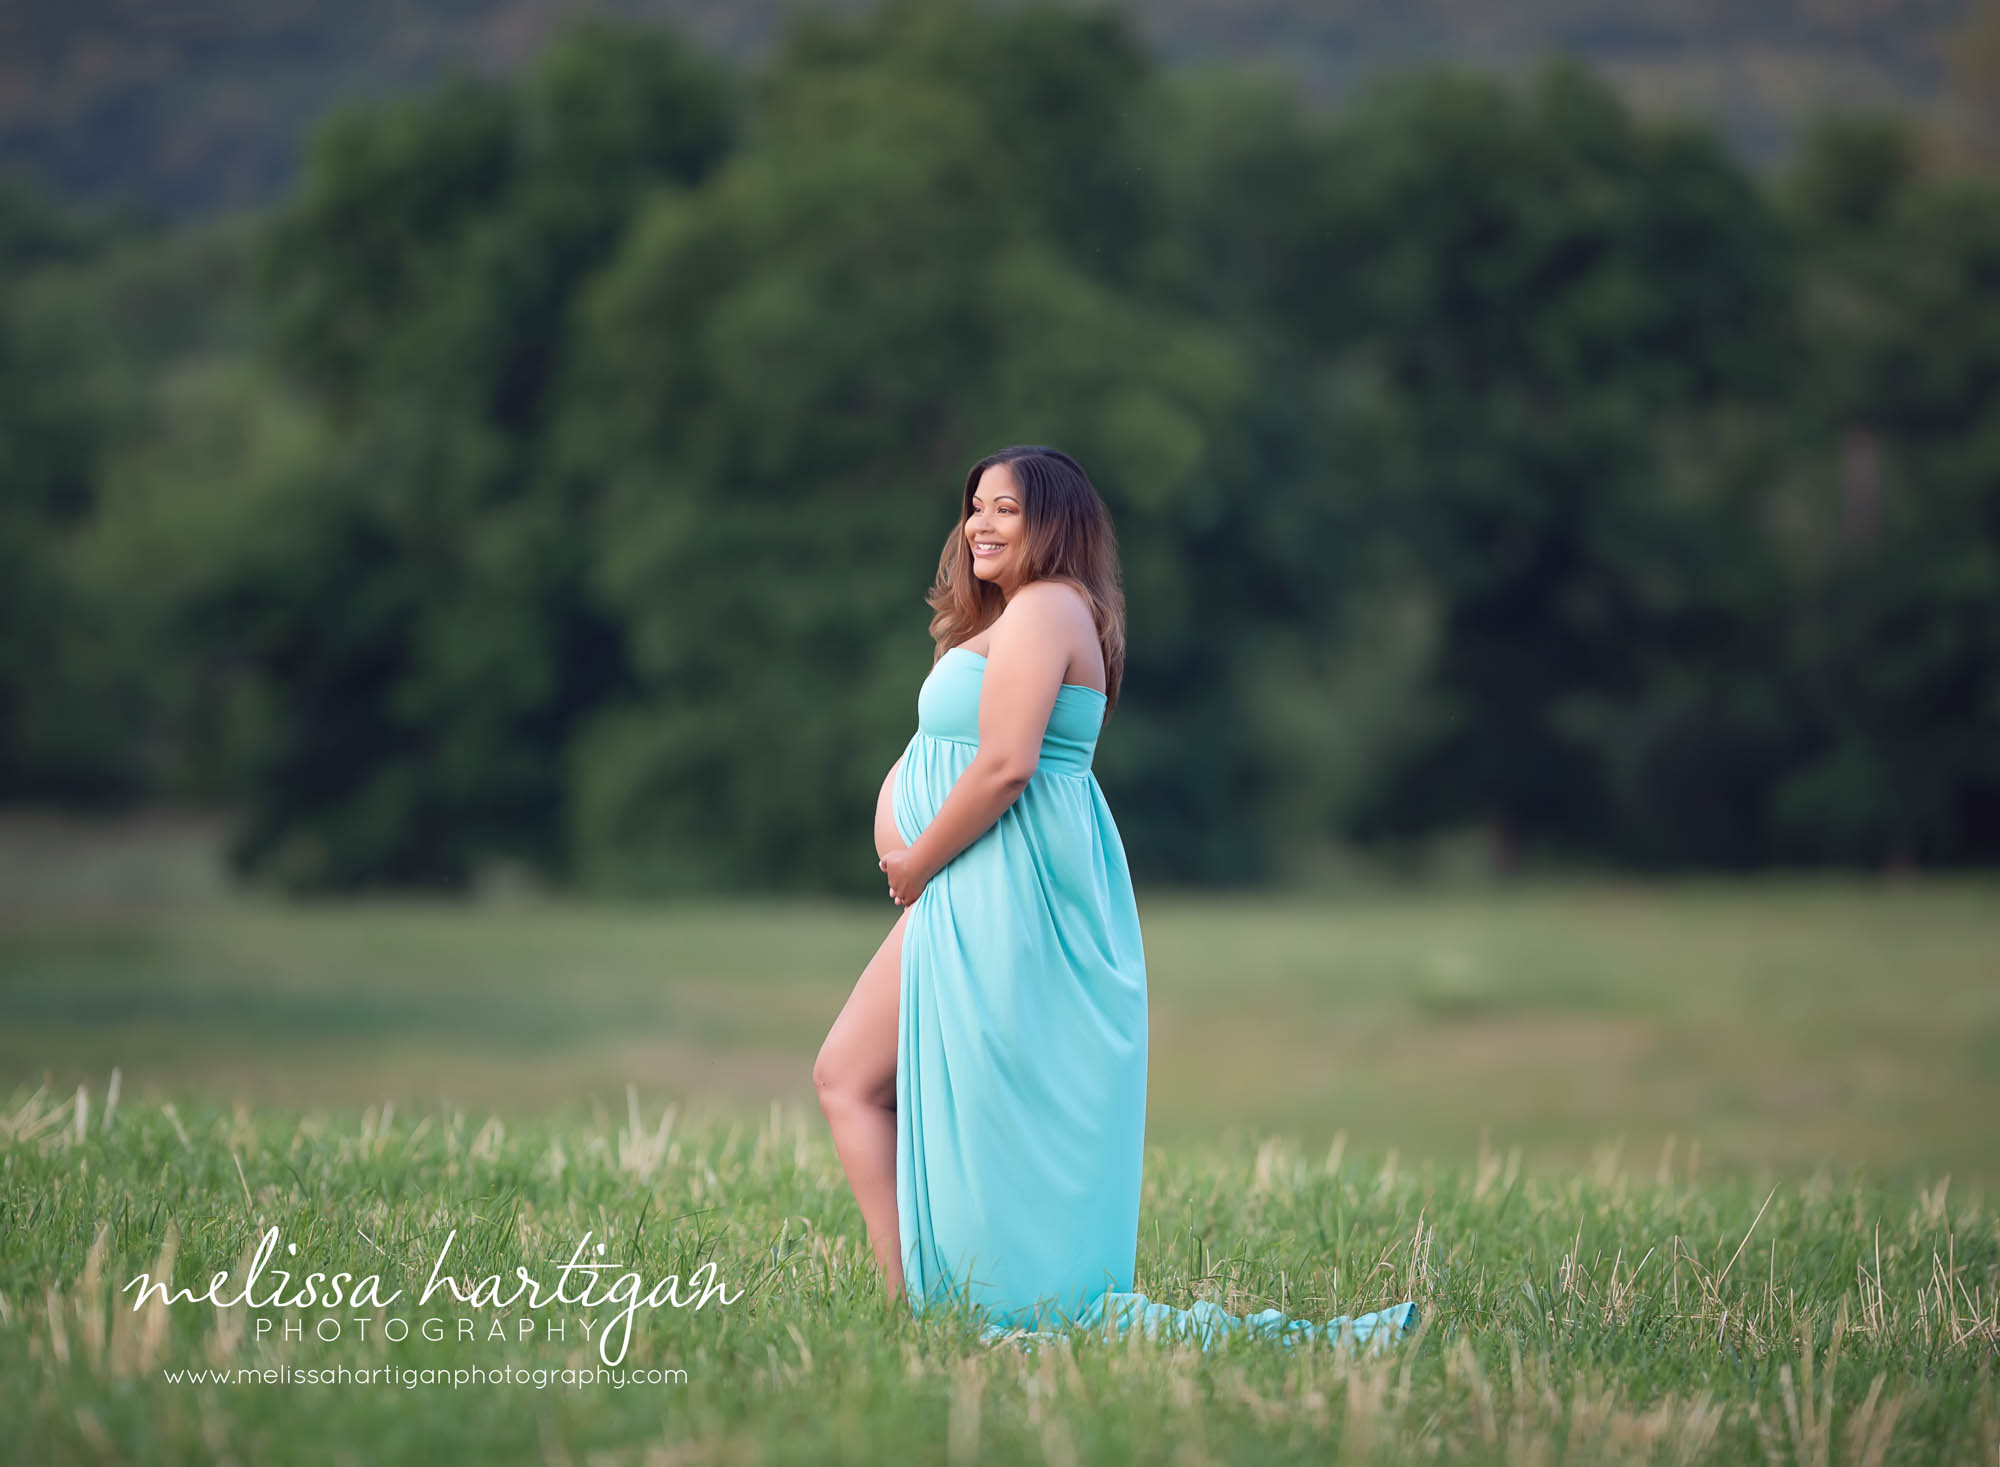 Expectant mom standing maternity pose showing and holding pregnant baby bump looking away from camera CT maternity photography